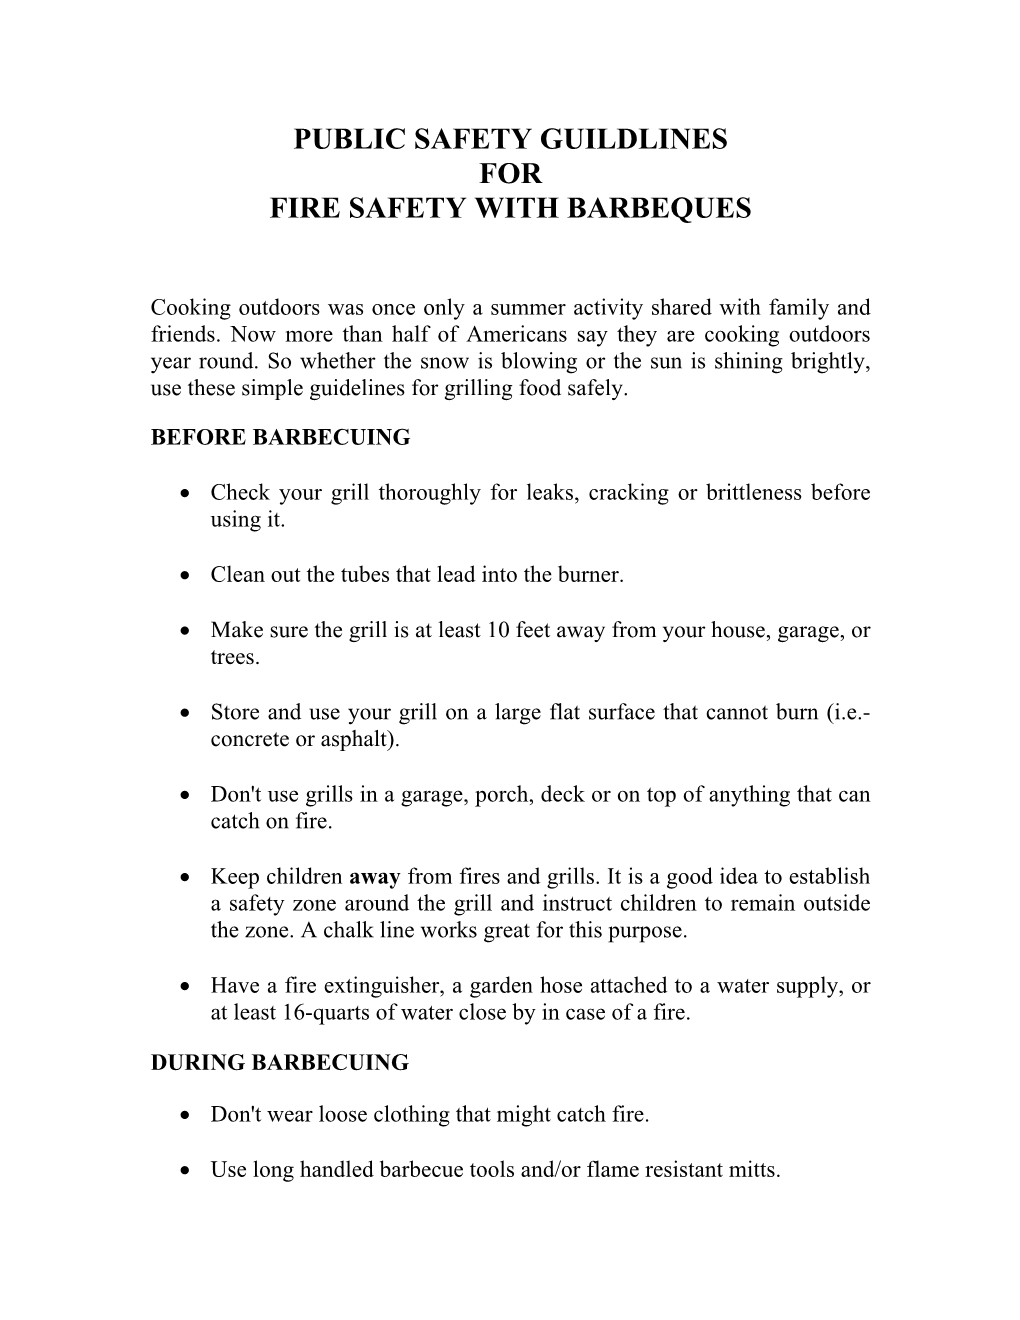 Public Safety Guildlines for Fire Safety with Barbeques